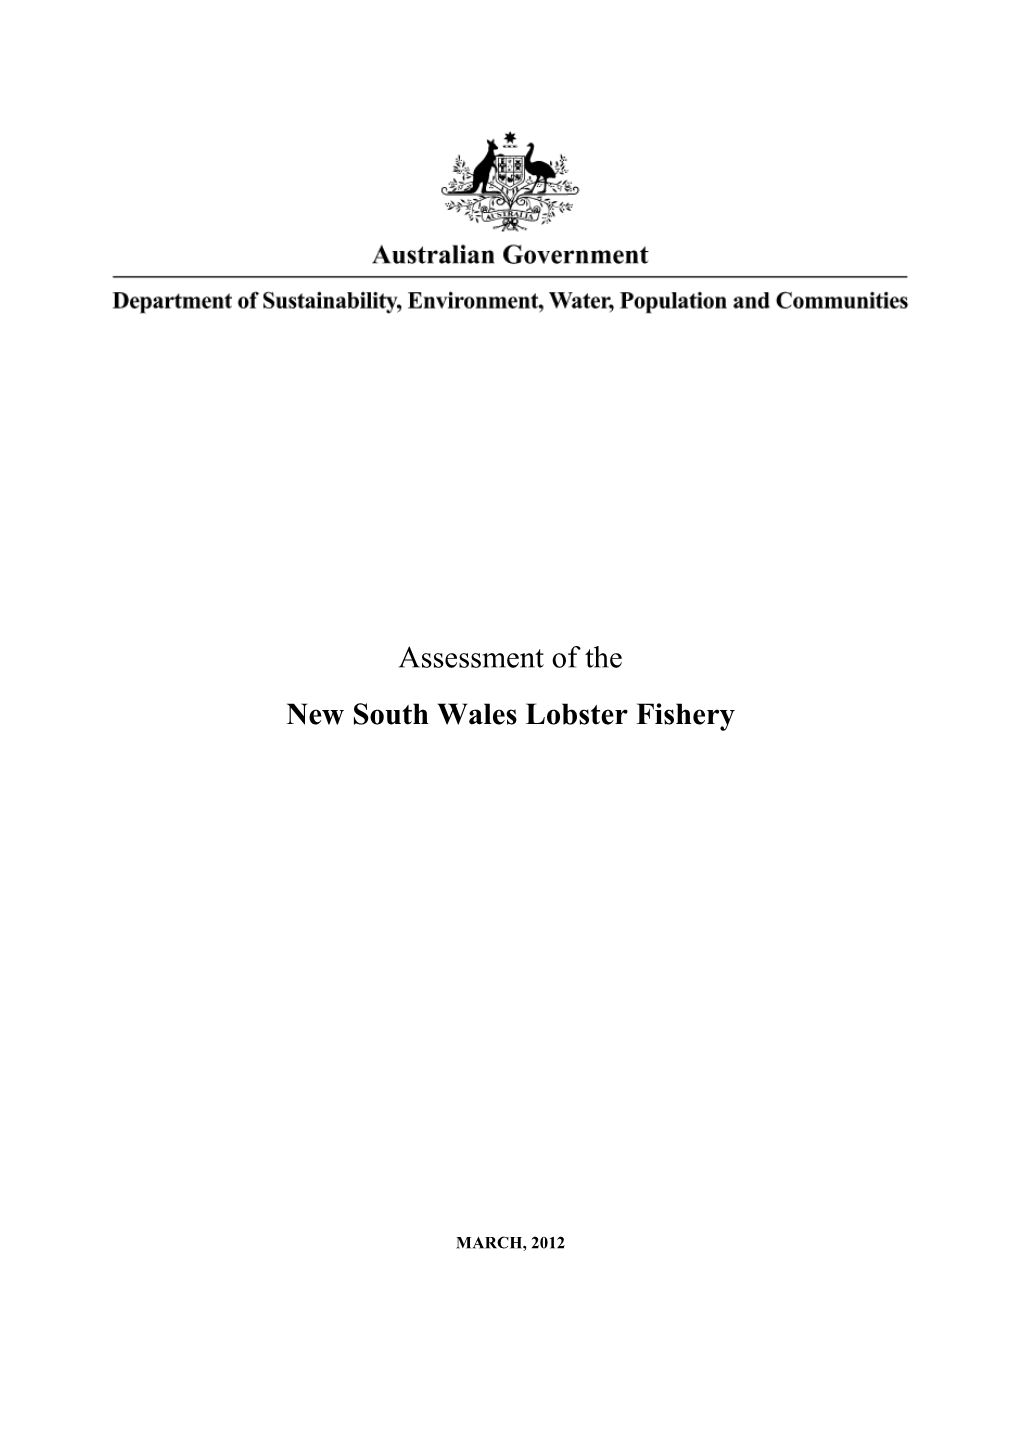 Assessment of the New South Wales Lobster Fishery